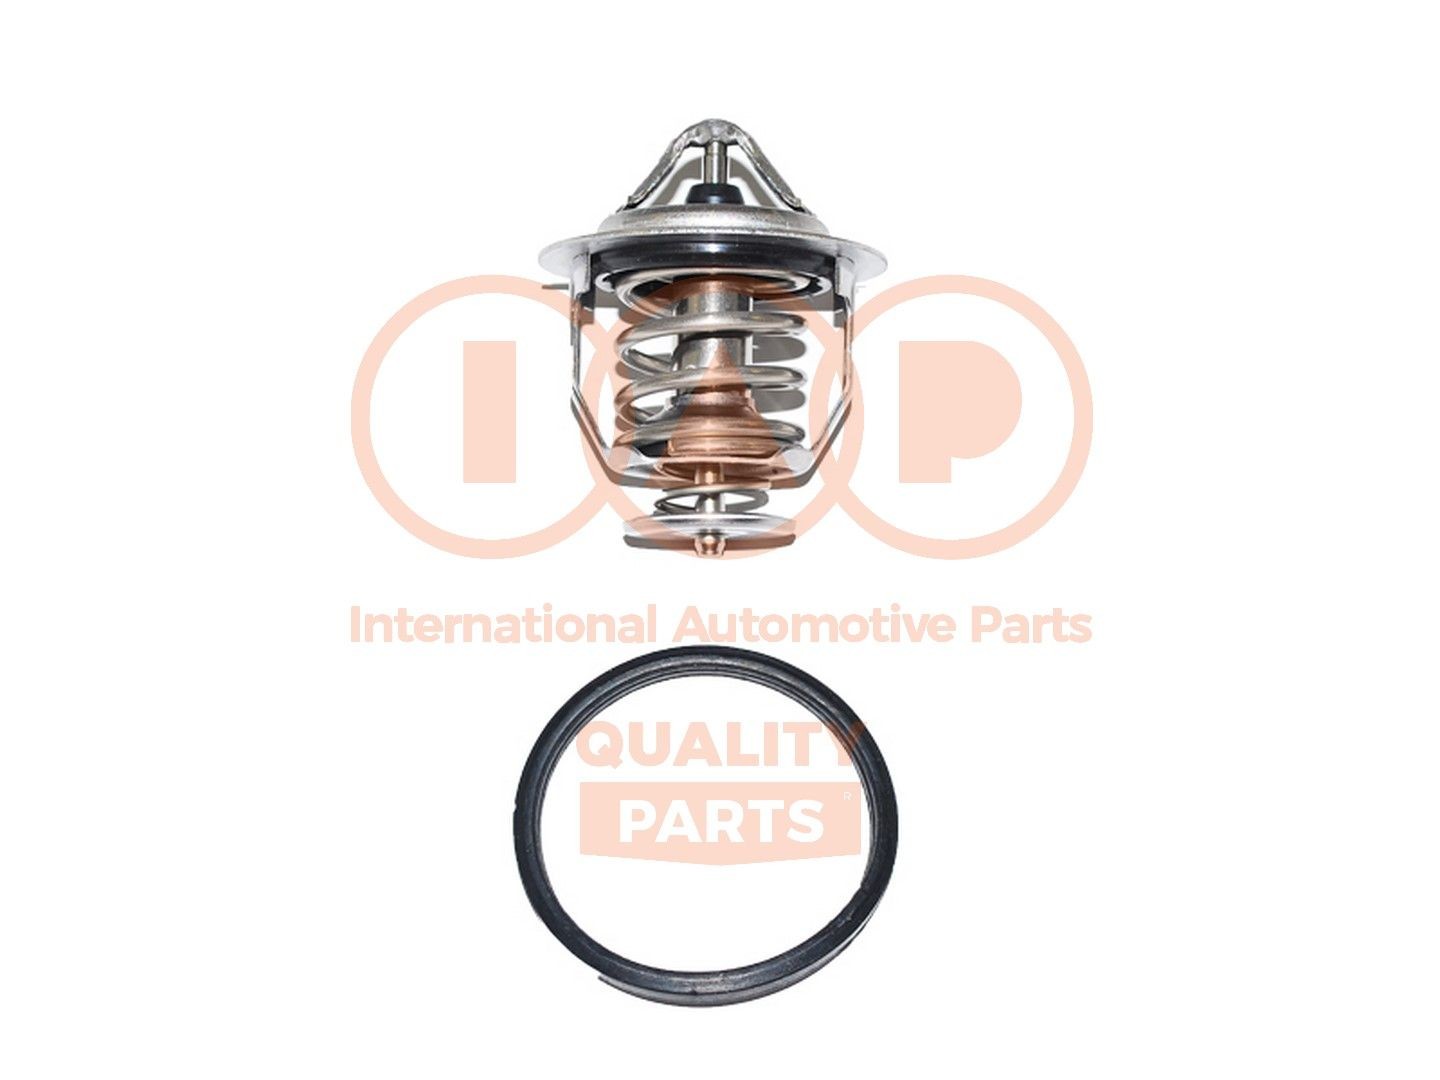 IAP QUALITY PARTS 155-17055 Engine thermostat 90916 03145